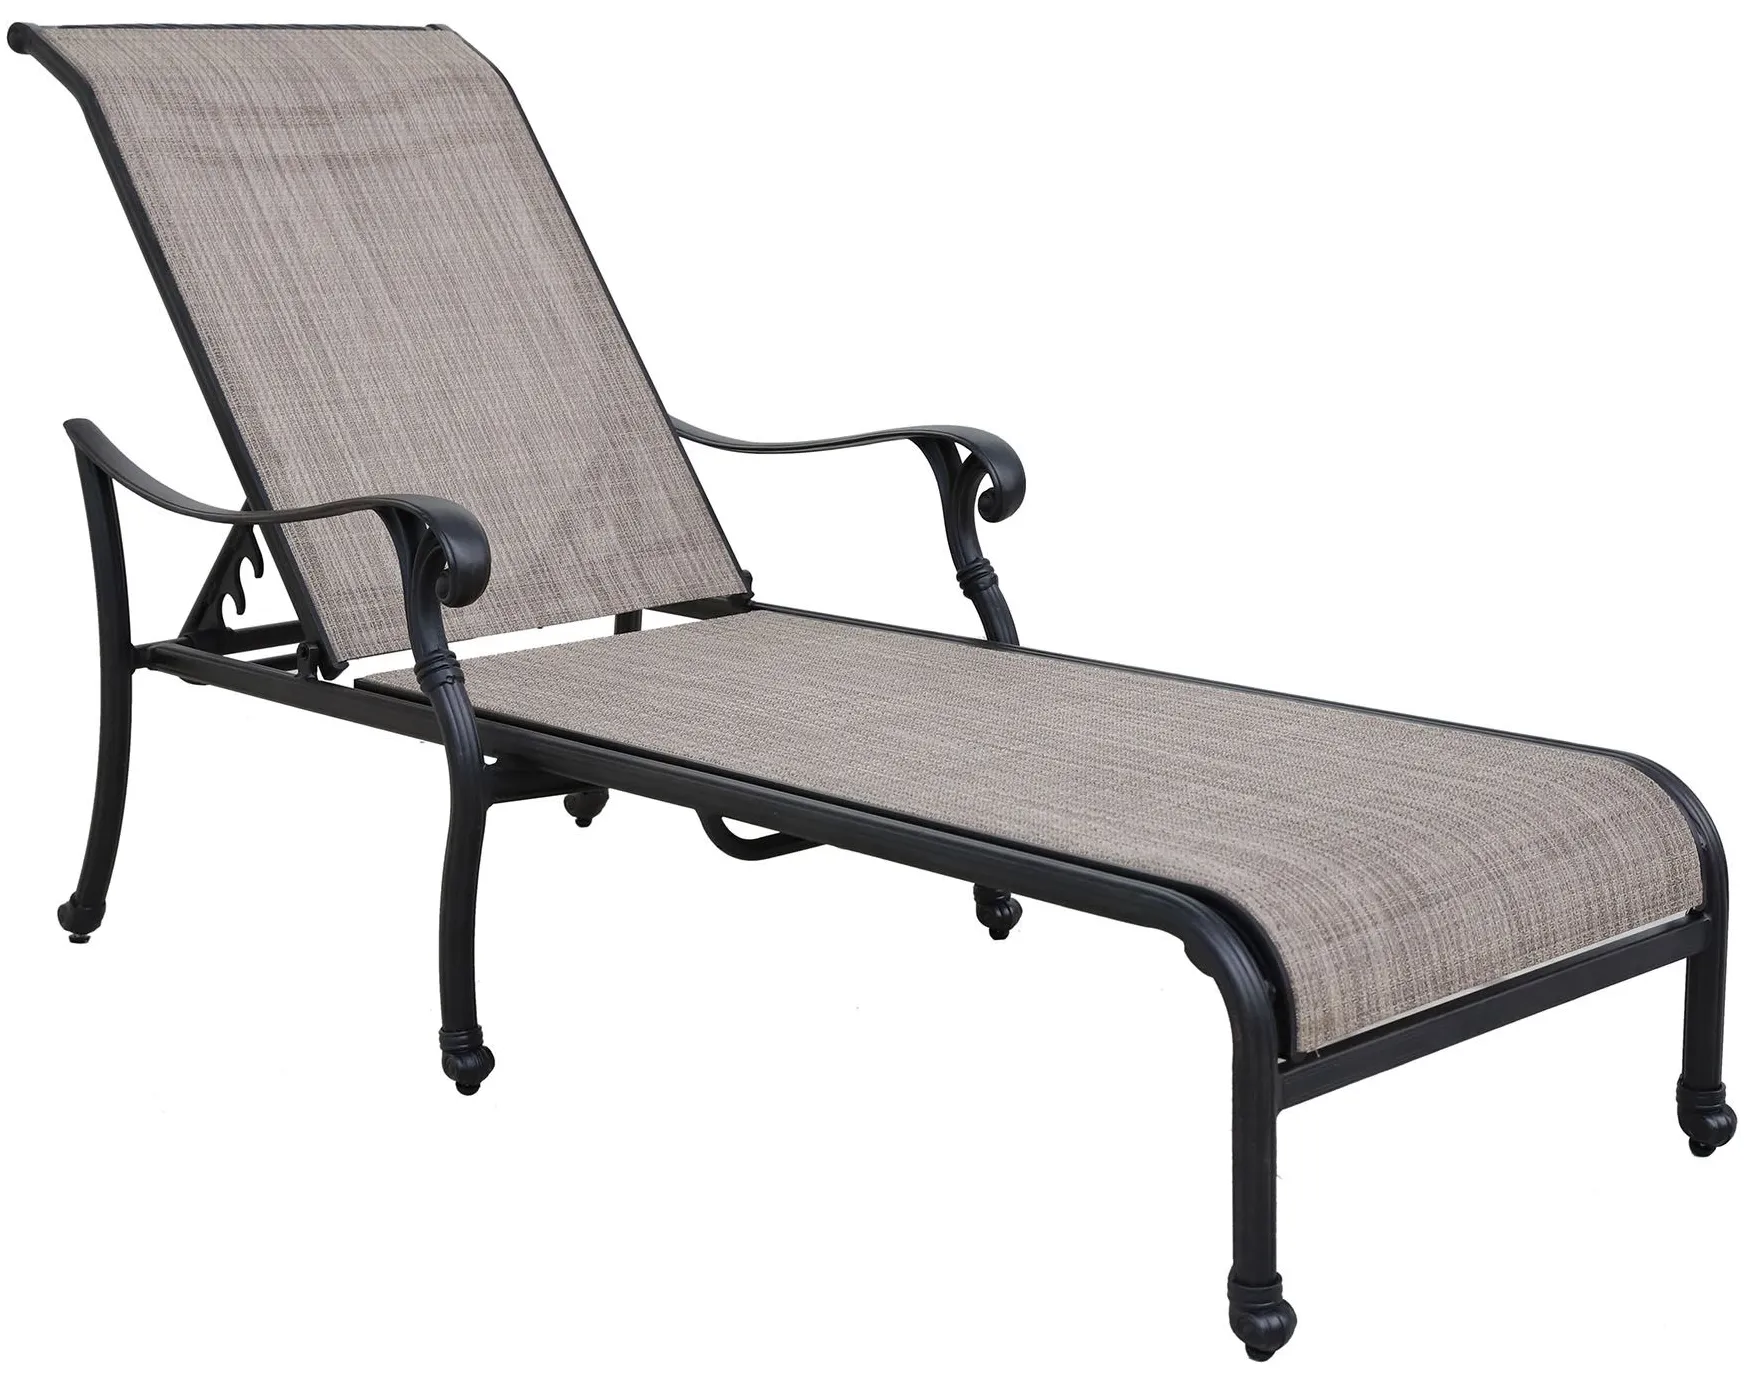 Claremont Sling Chaise Lounger